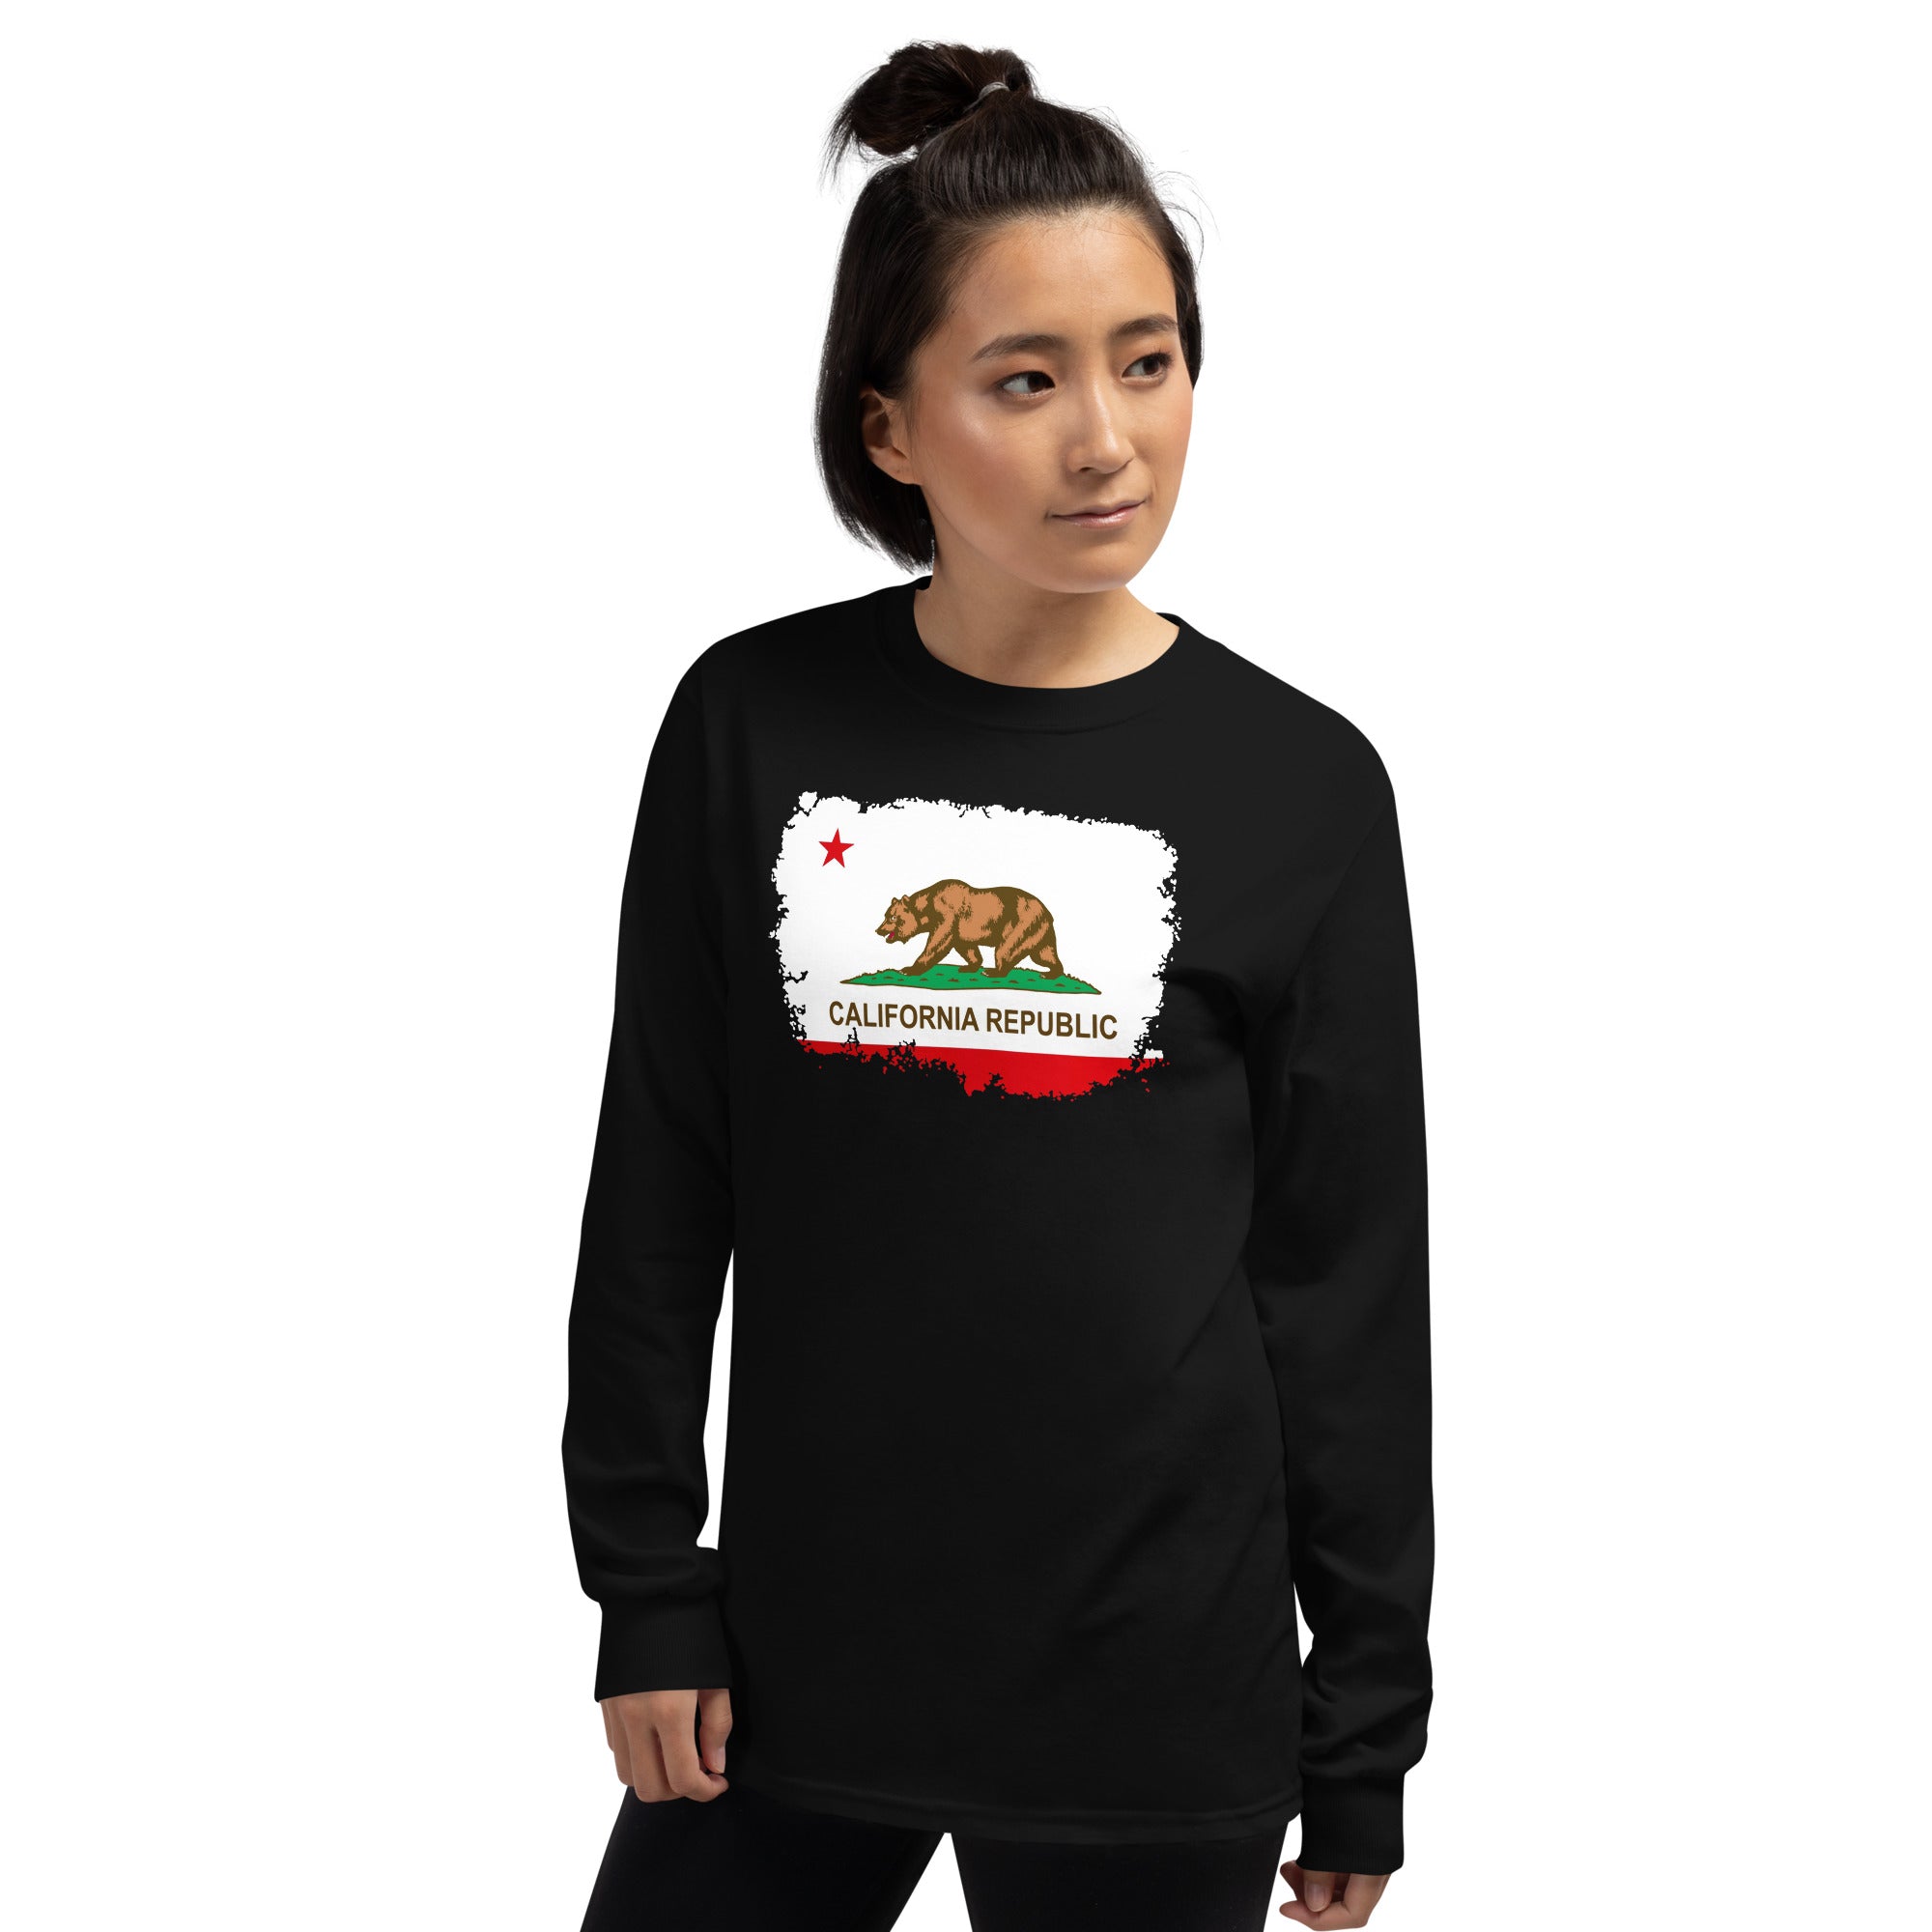 California State Flag Torn and battered Long Sleeve Shirt